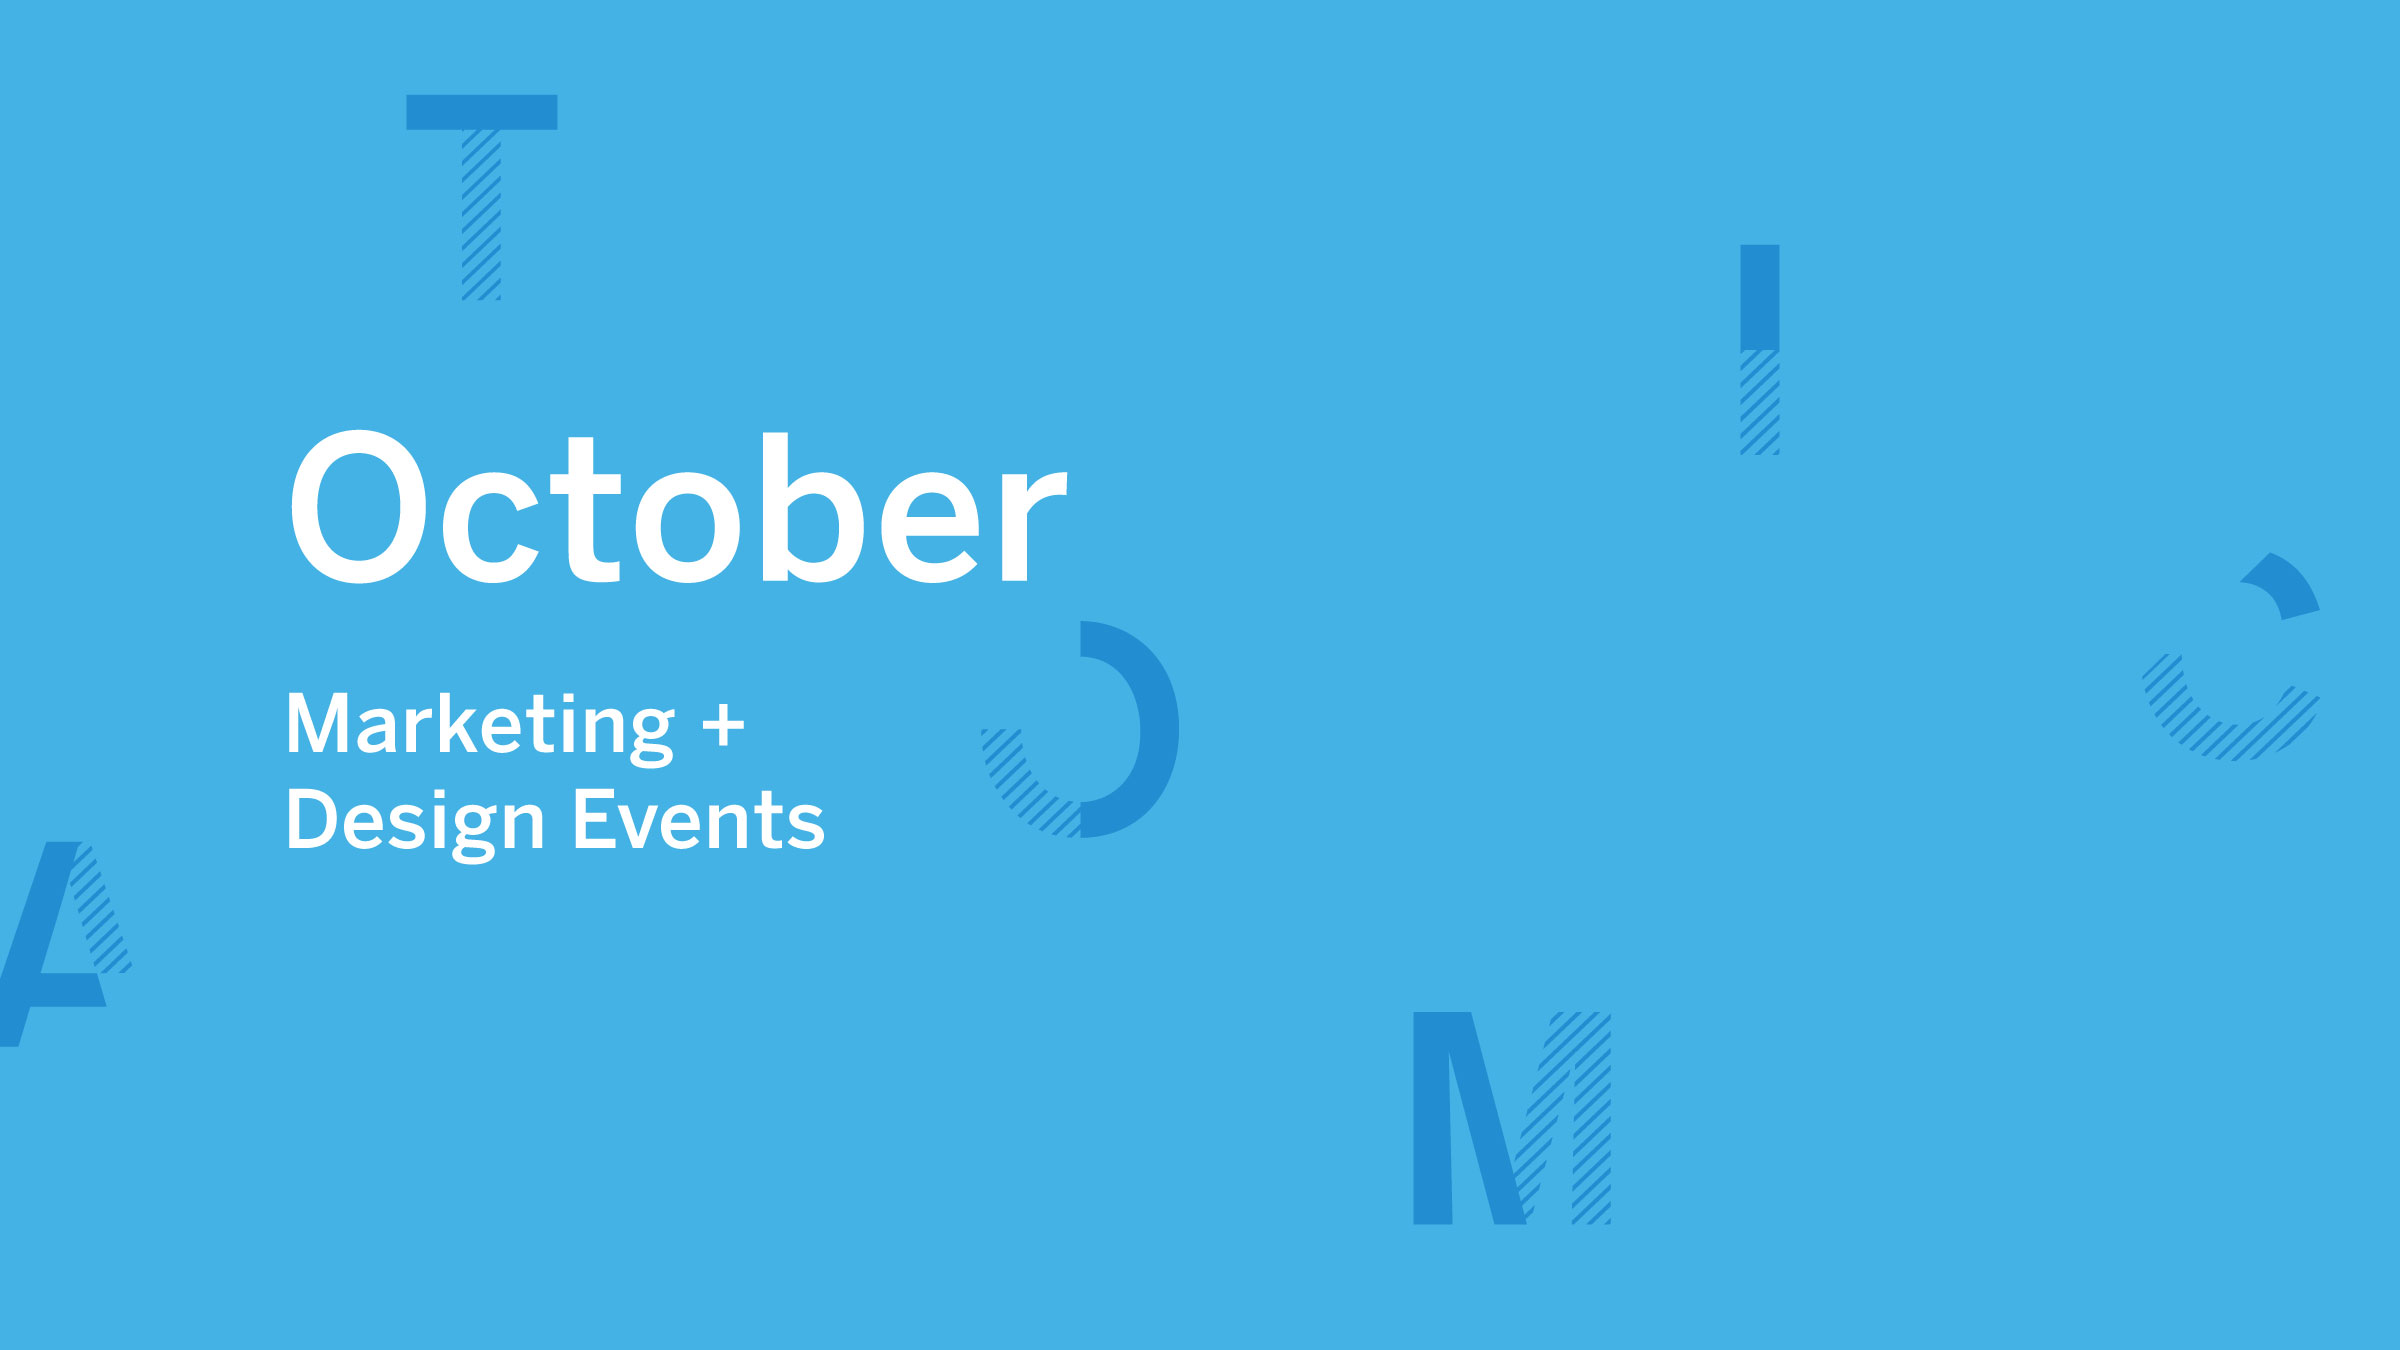 October 2019 Marketing and Design Events